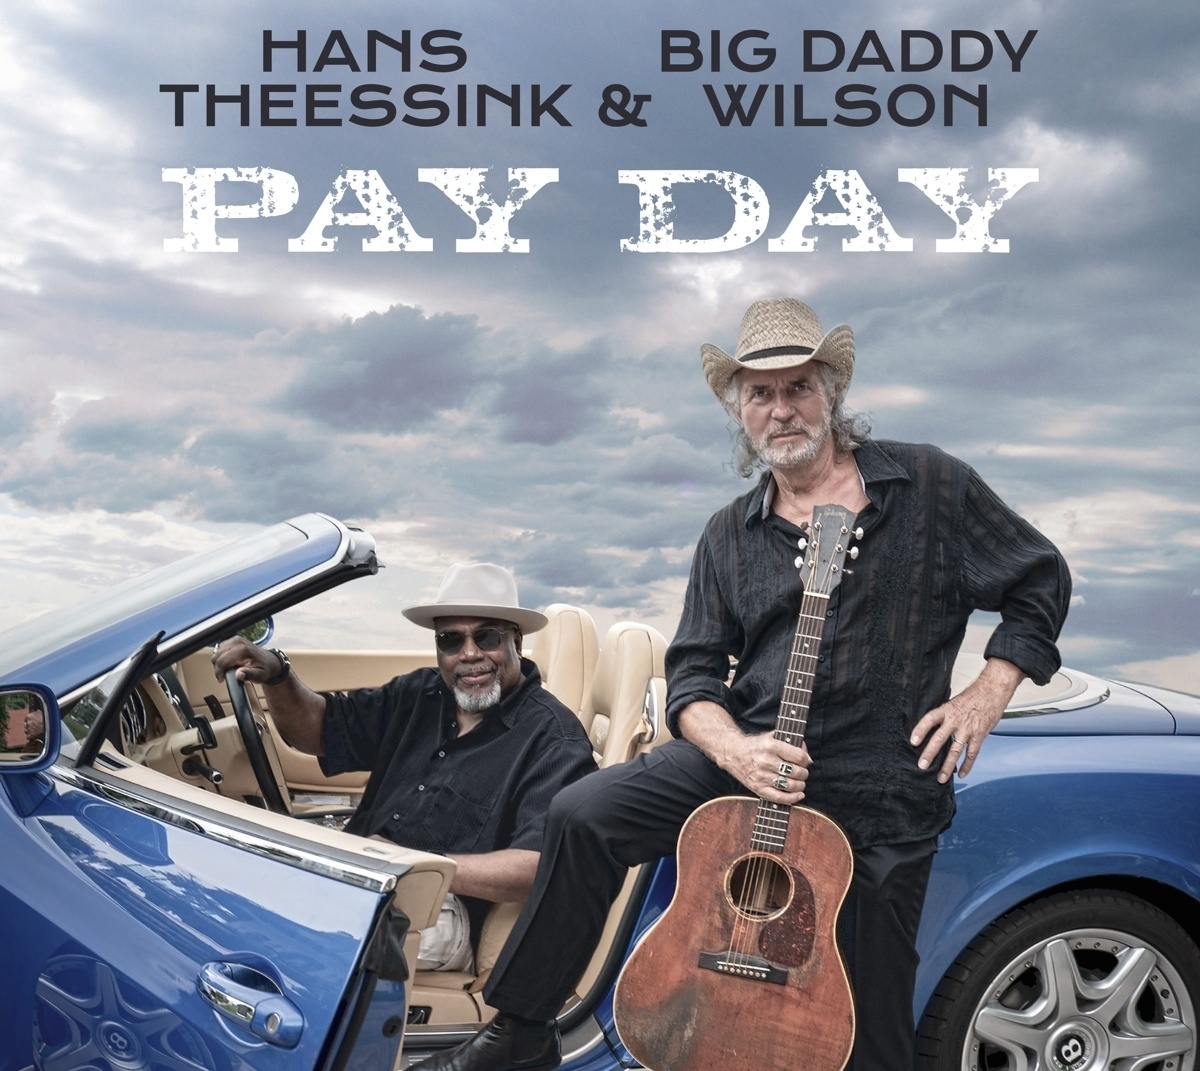 Payday - Hans Theessink & Wilson Big Daddy. (CD)